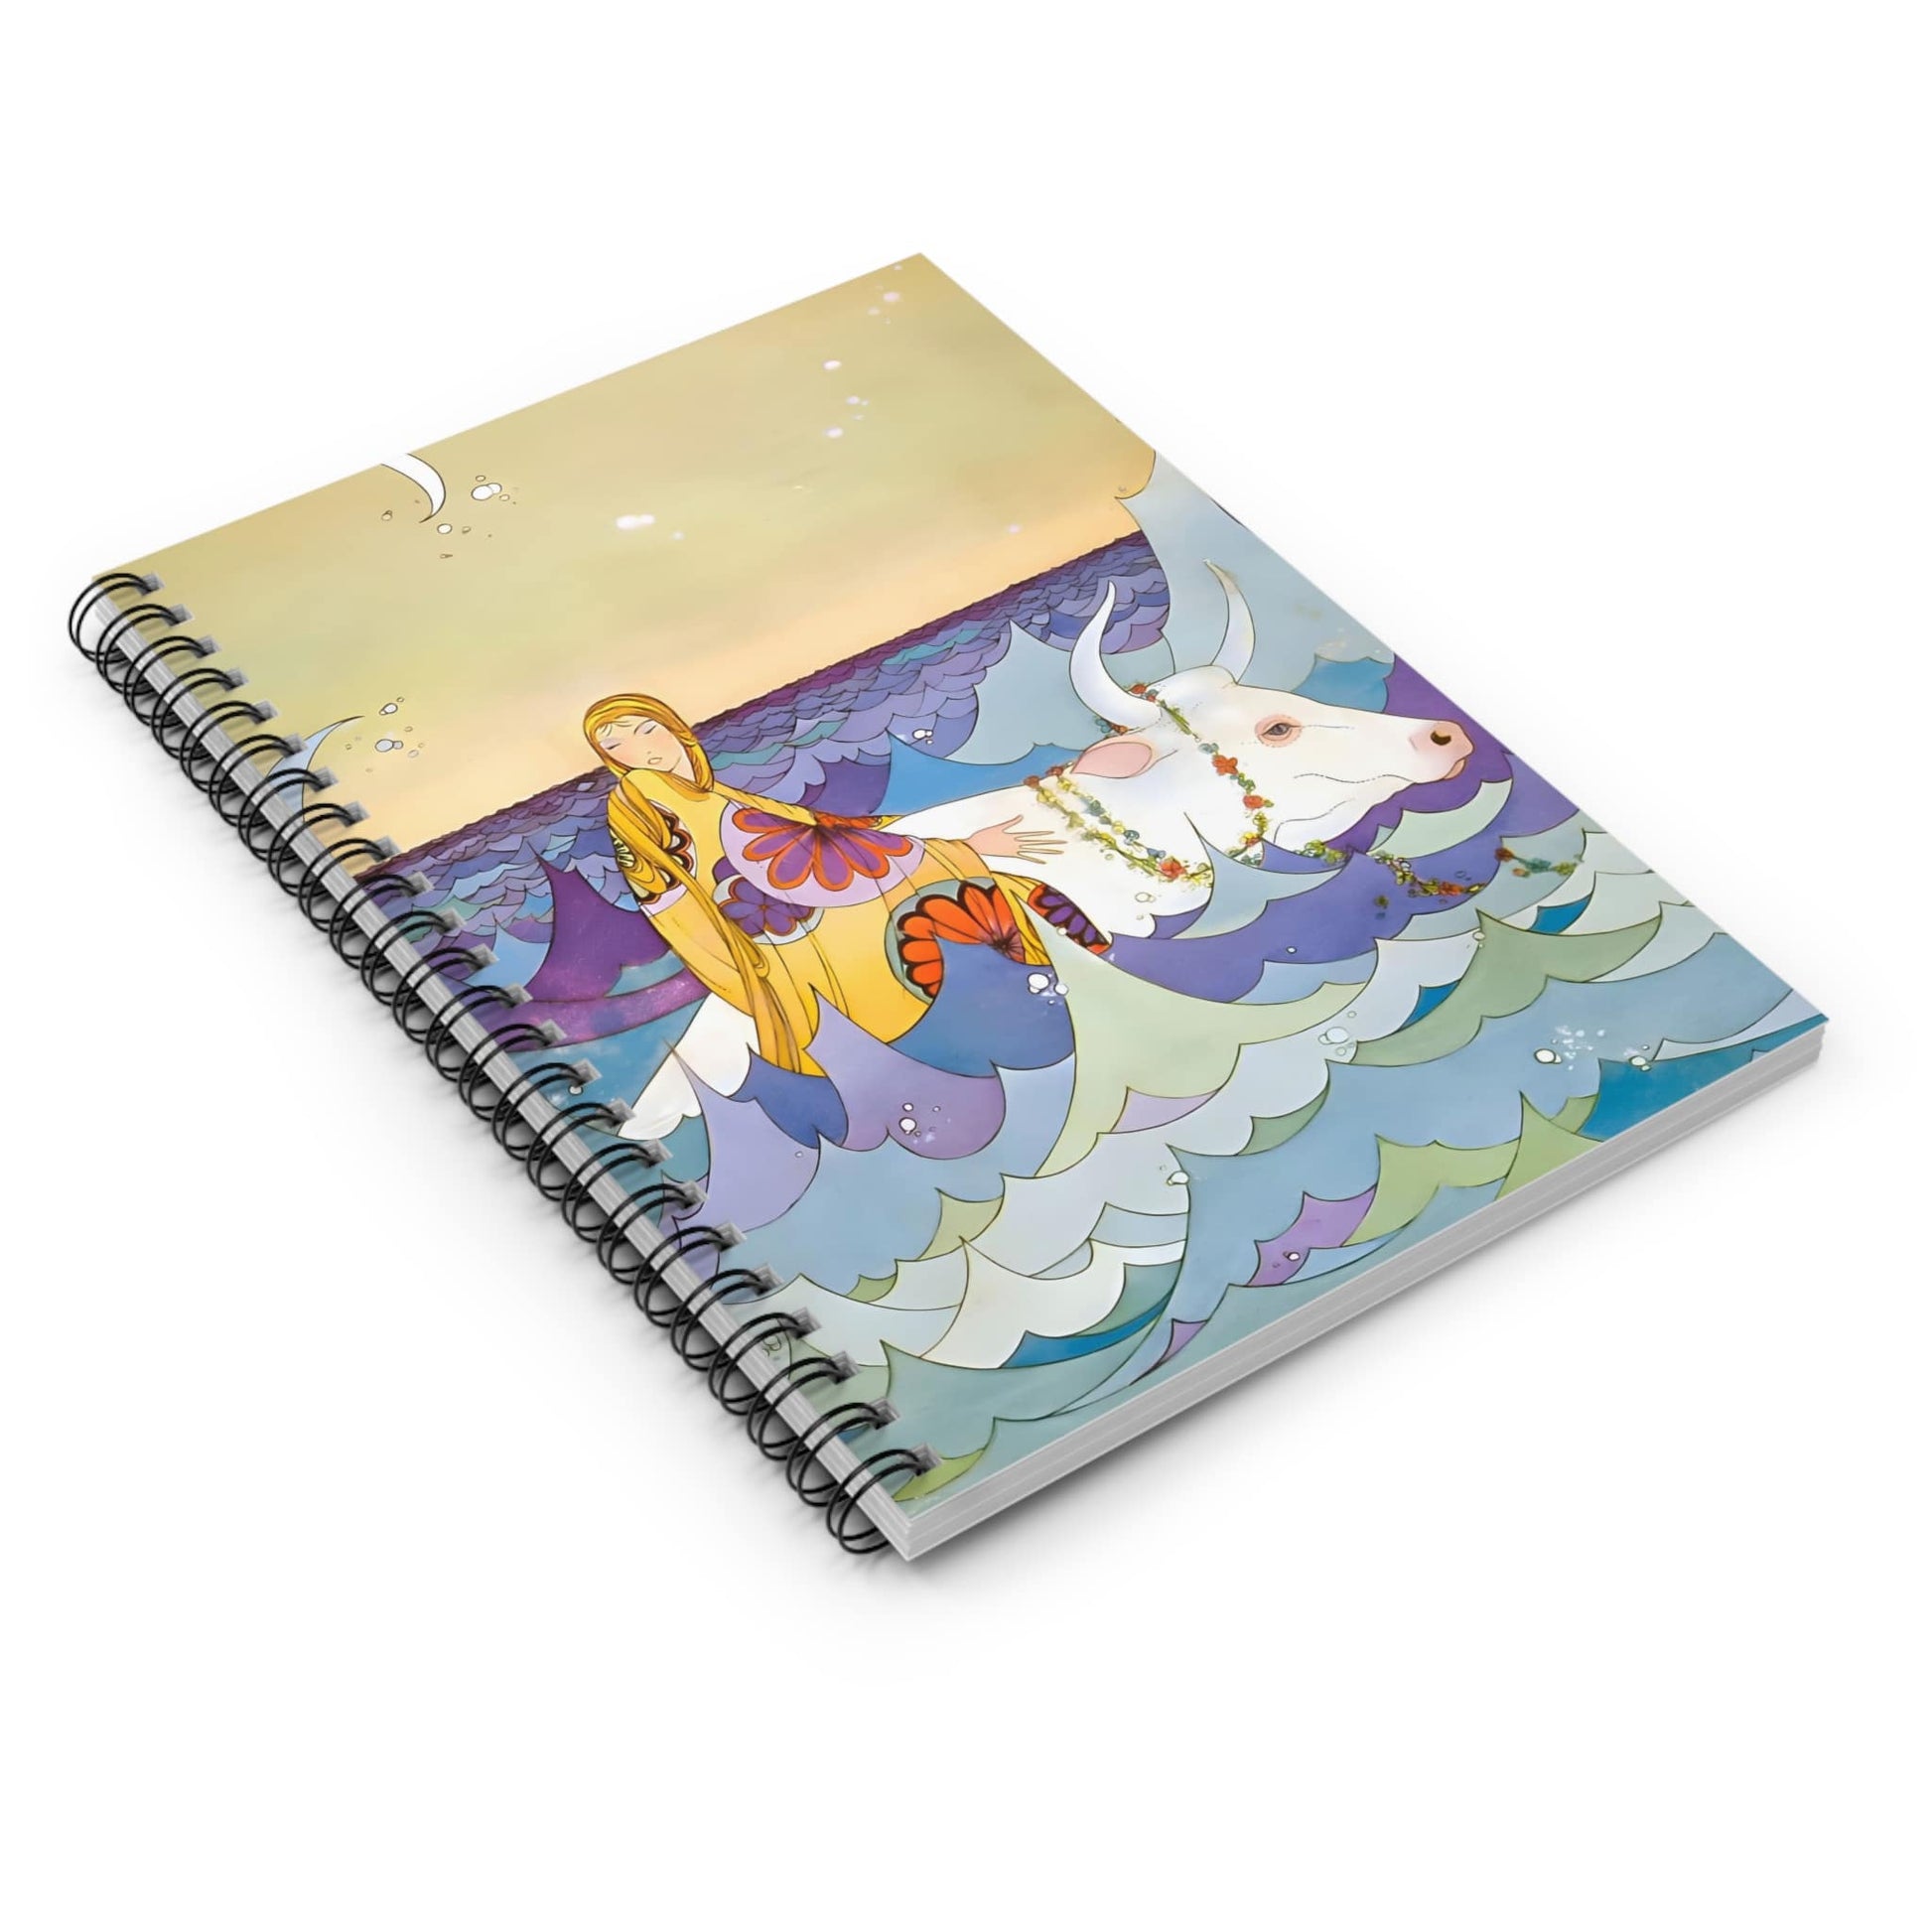 Fantasy Ocean Spiral Notebook Laying Flat on White Surface